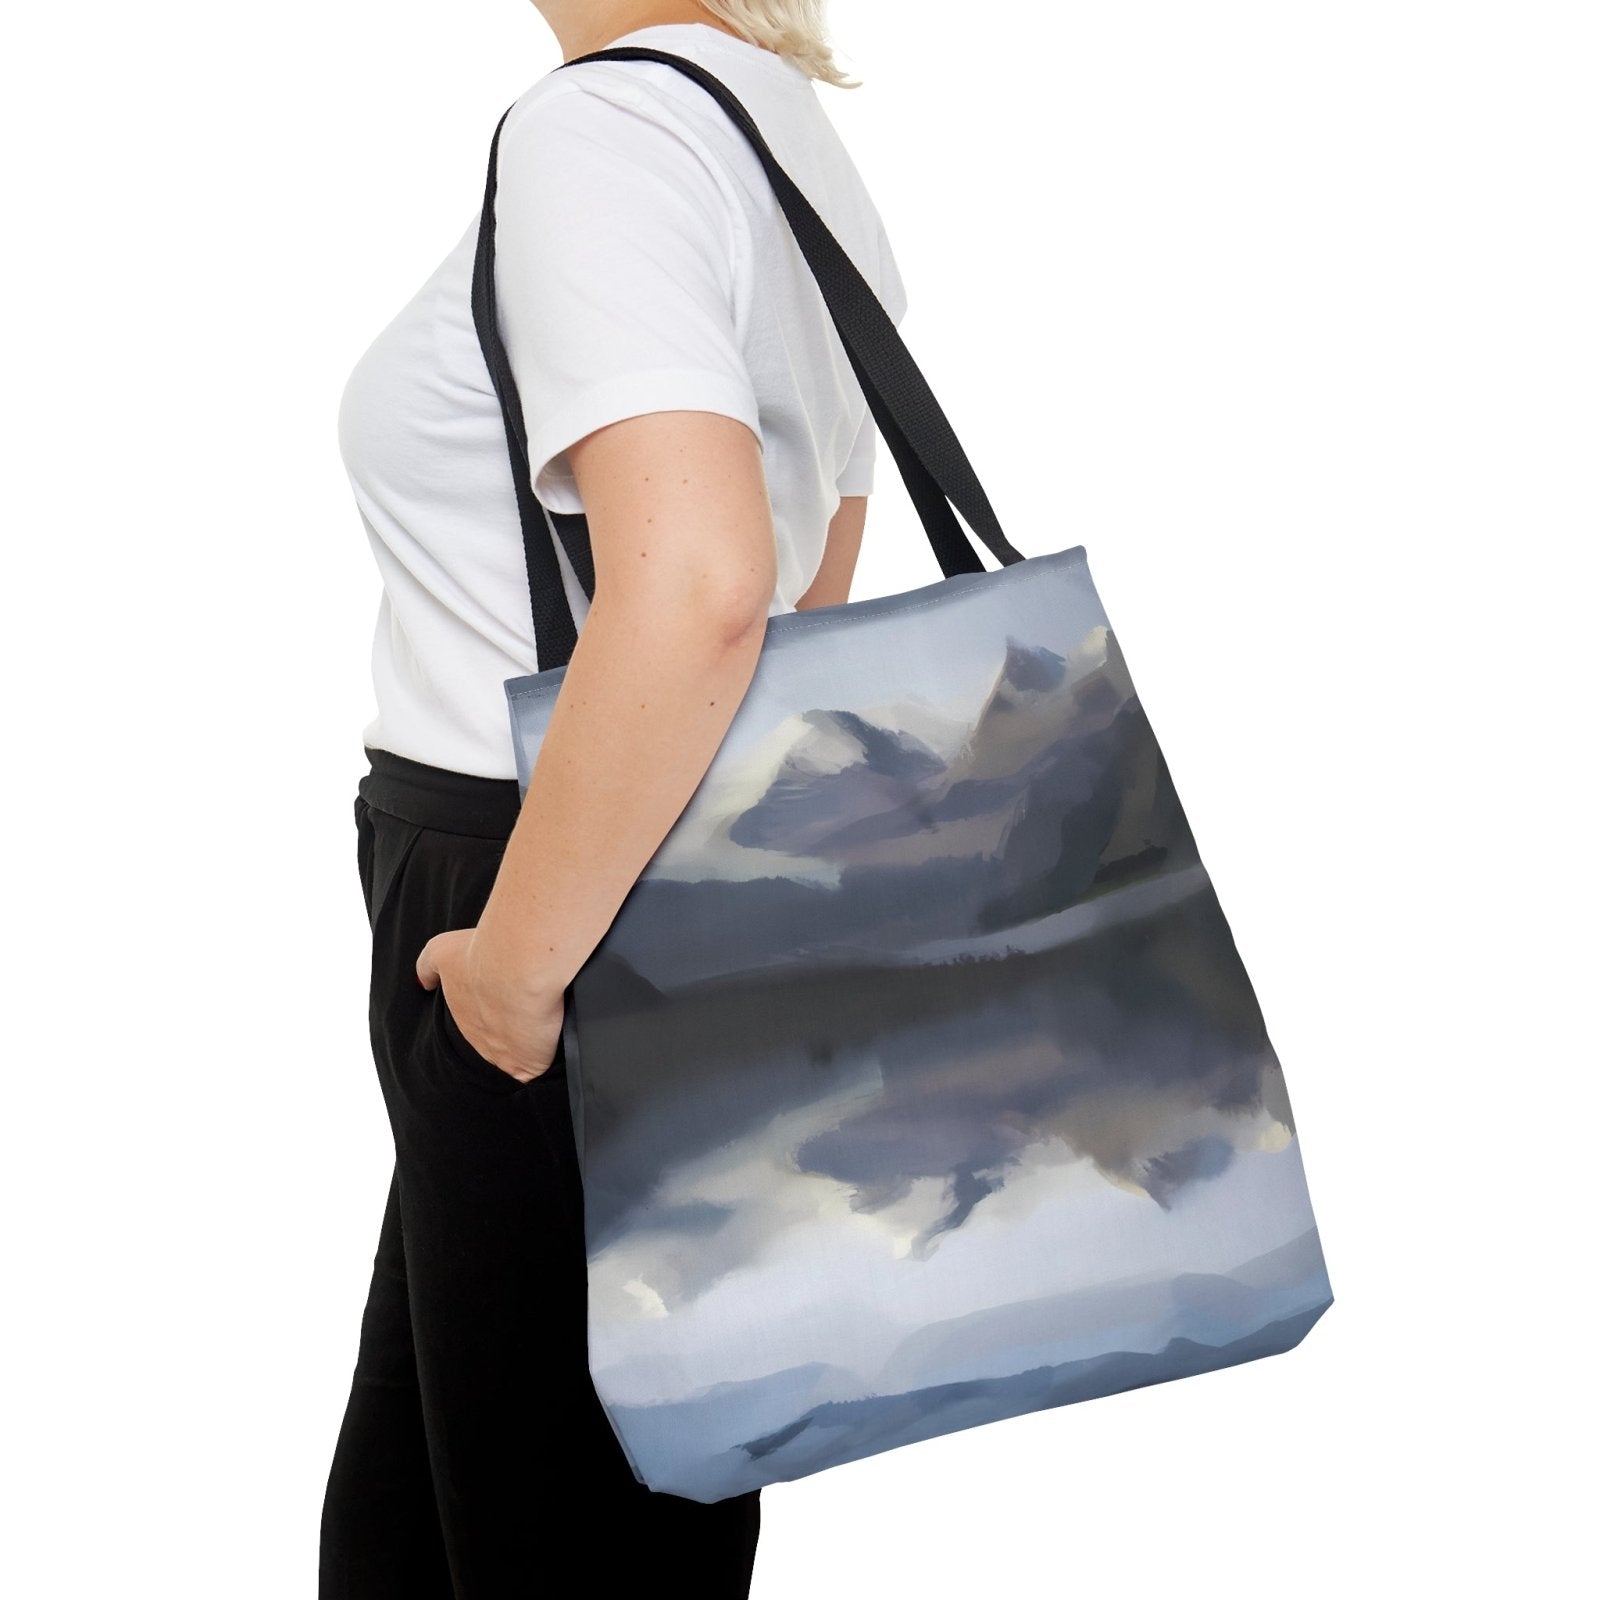 Peaceful Mountains Tote Bag, mountain inspired fashion, mountain painting tote - Subtle Blue M